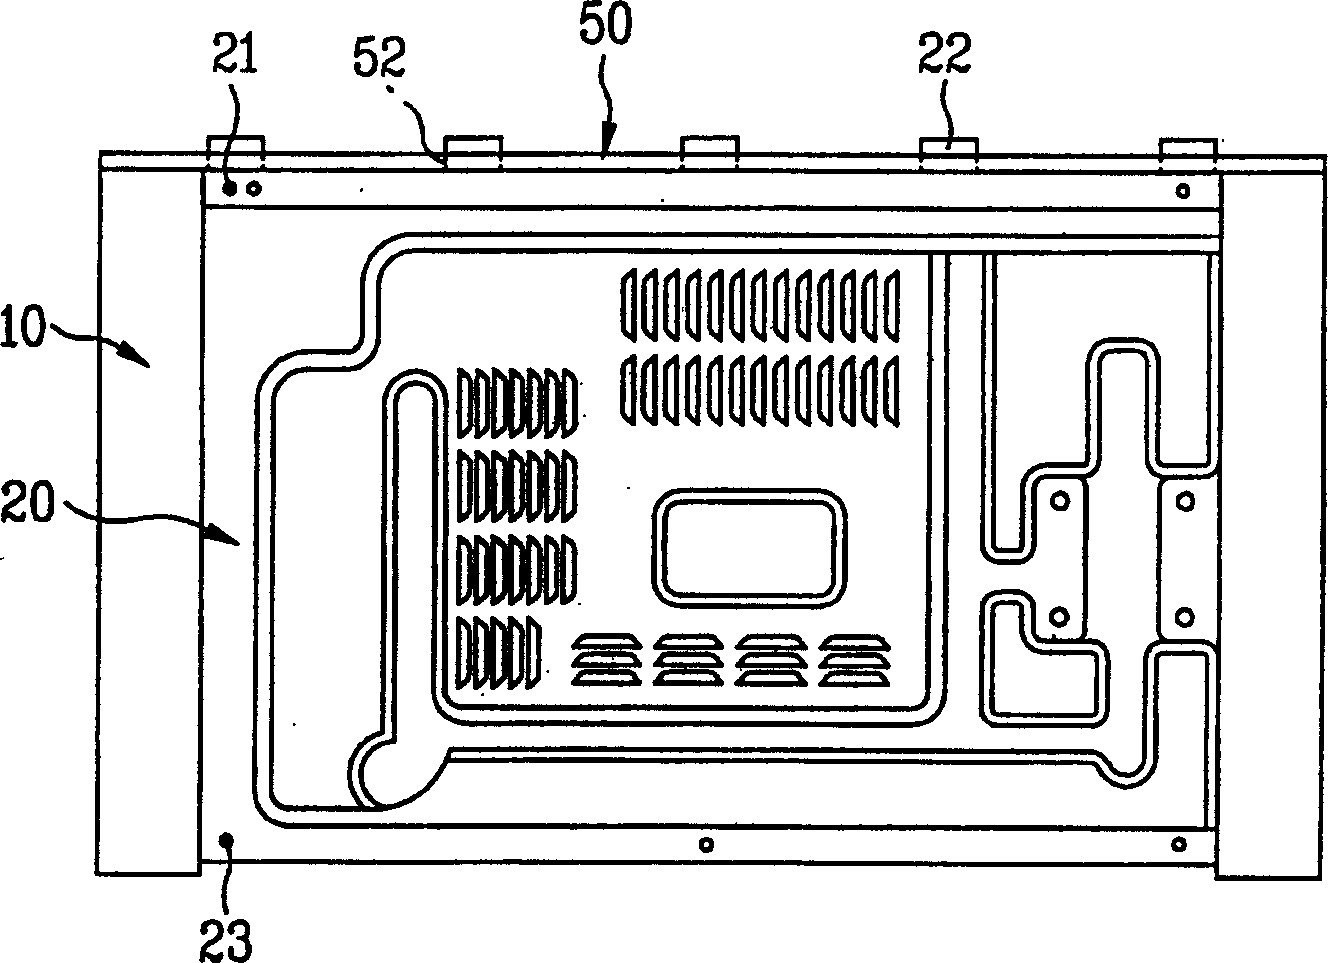 Assembly structure of microwave oven